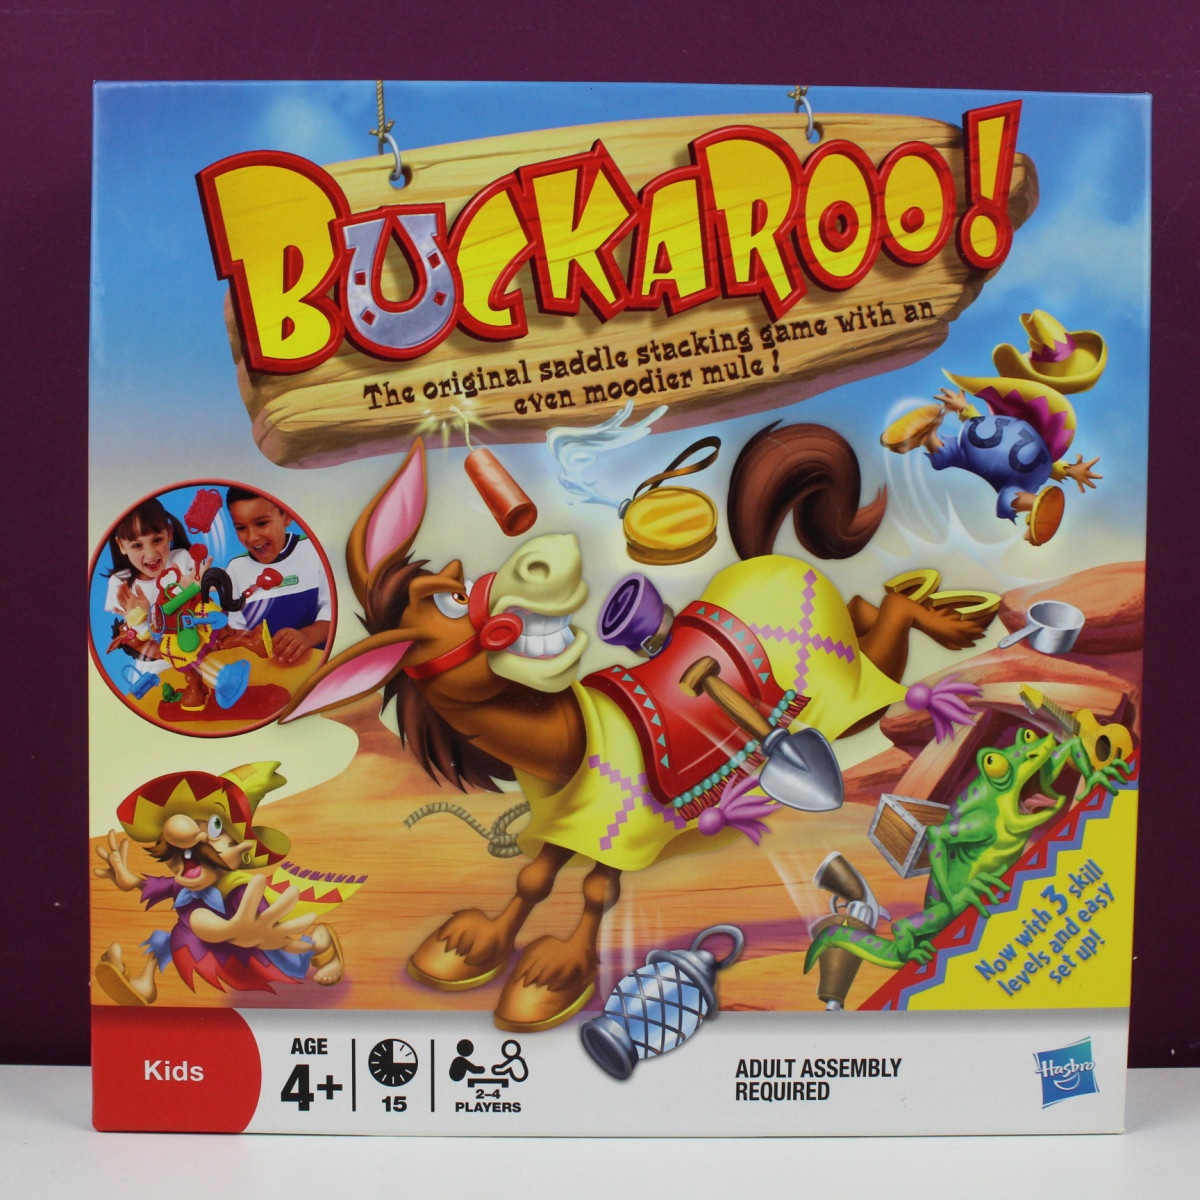 BUCKAROO THE SADDLE STACKING GAME WITH A MOODY MULE! 